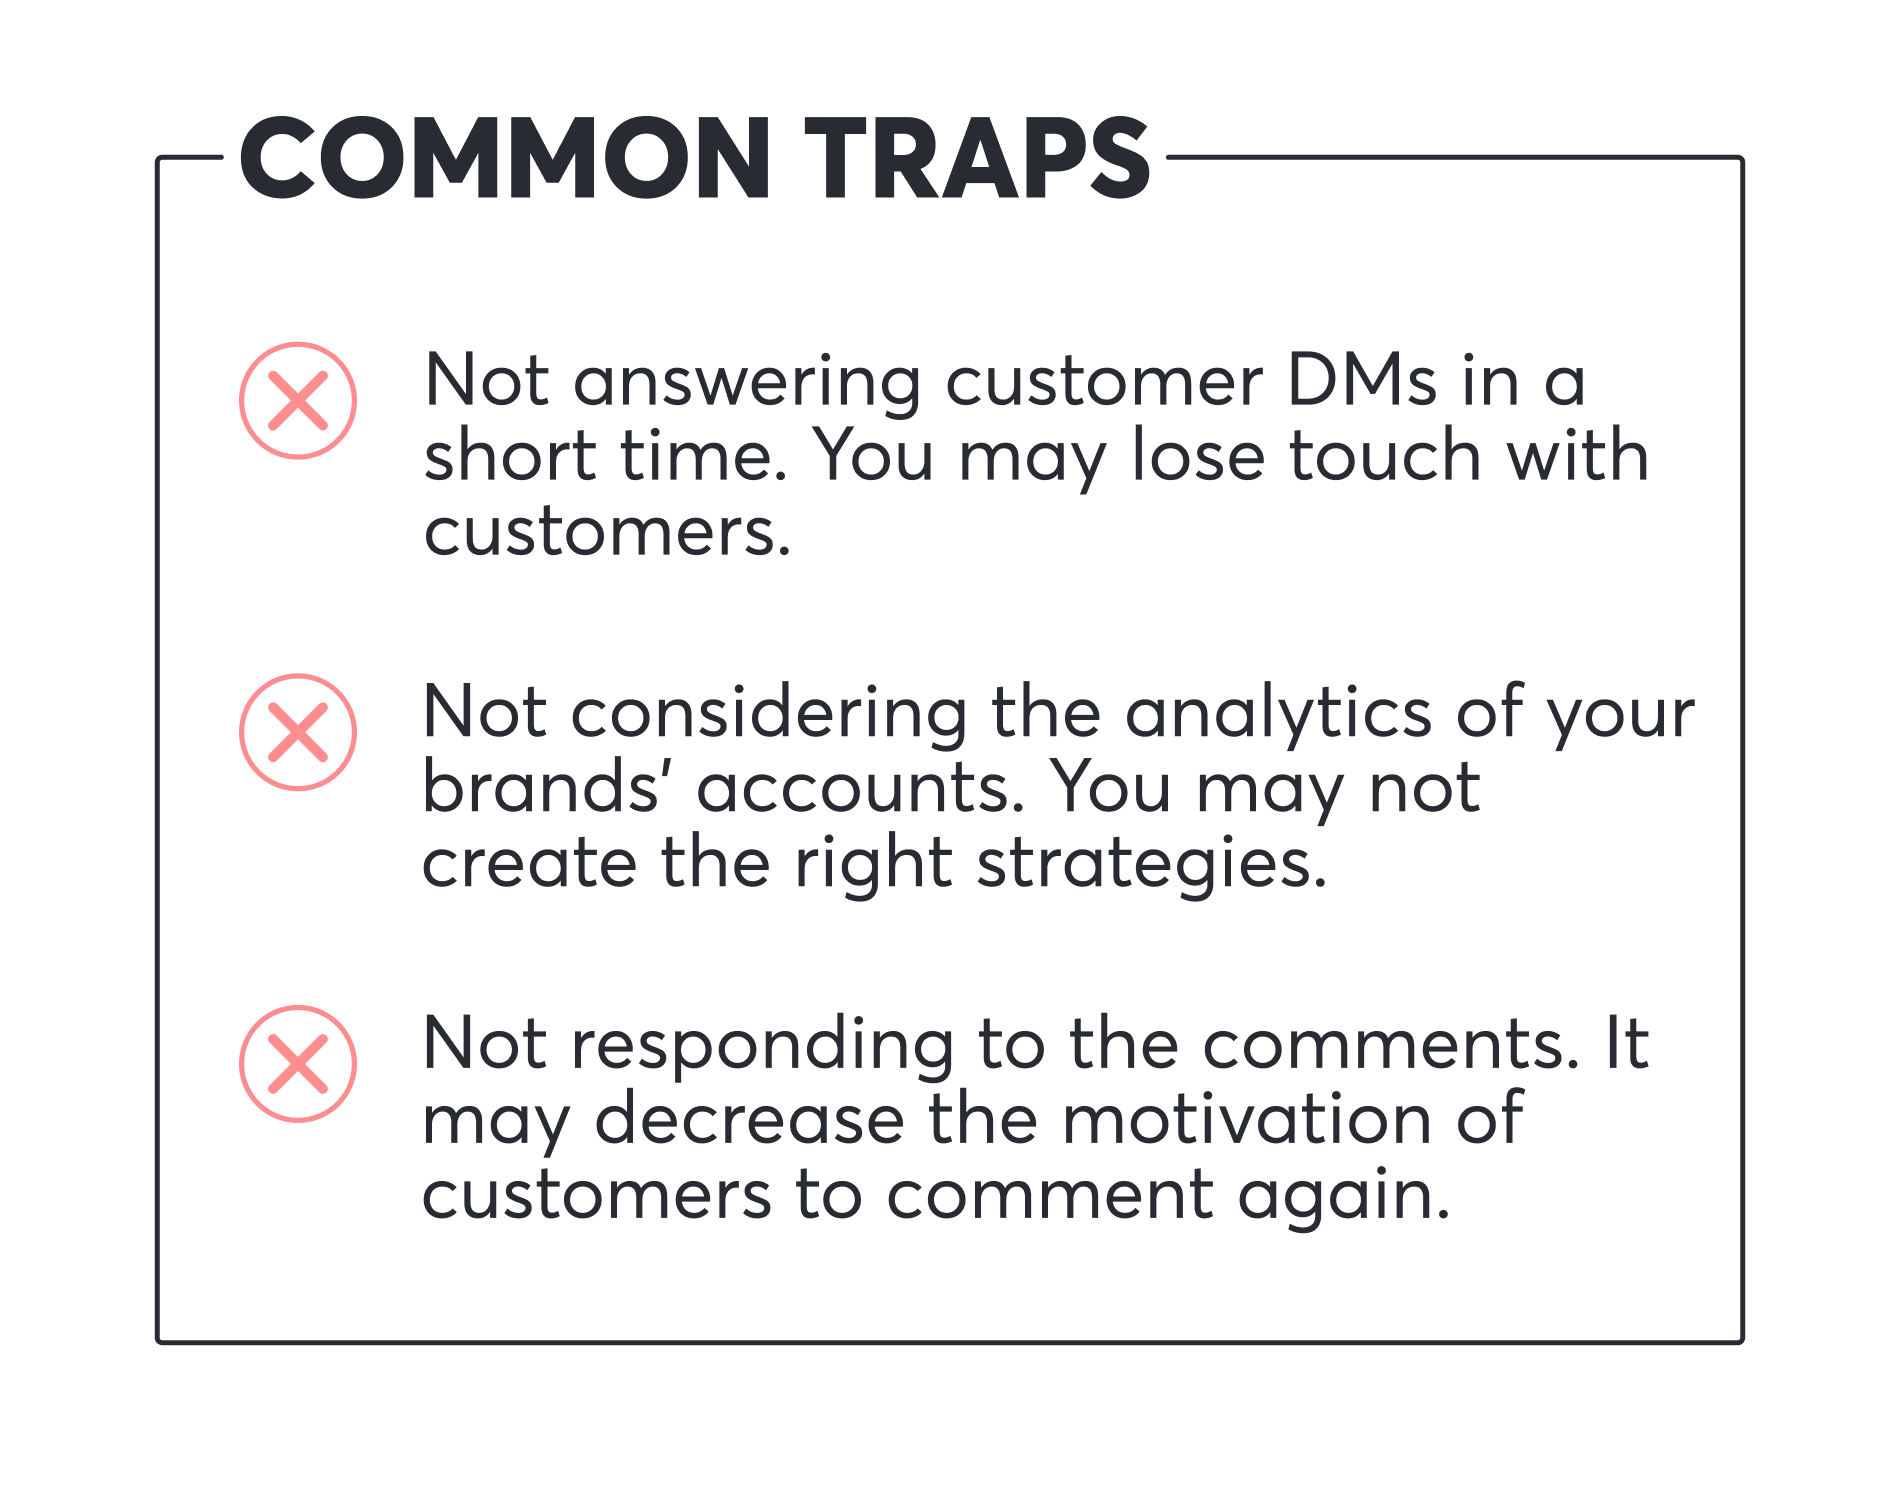 Common Traps to Leverage the Social Media